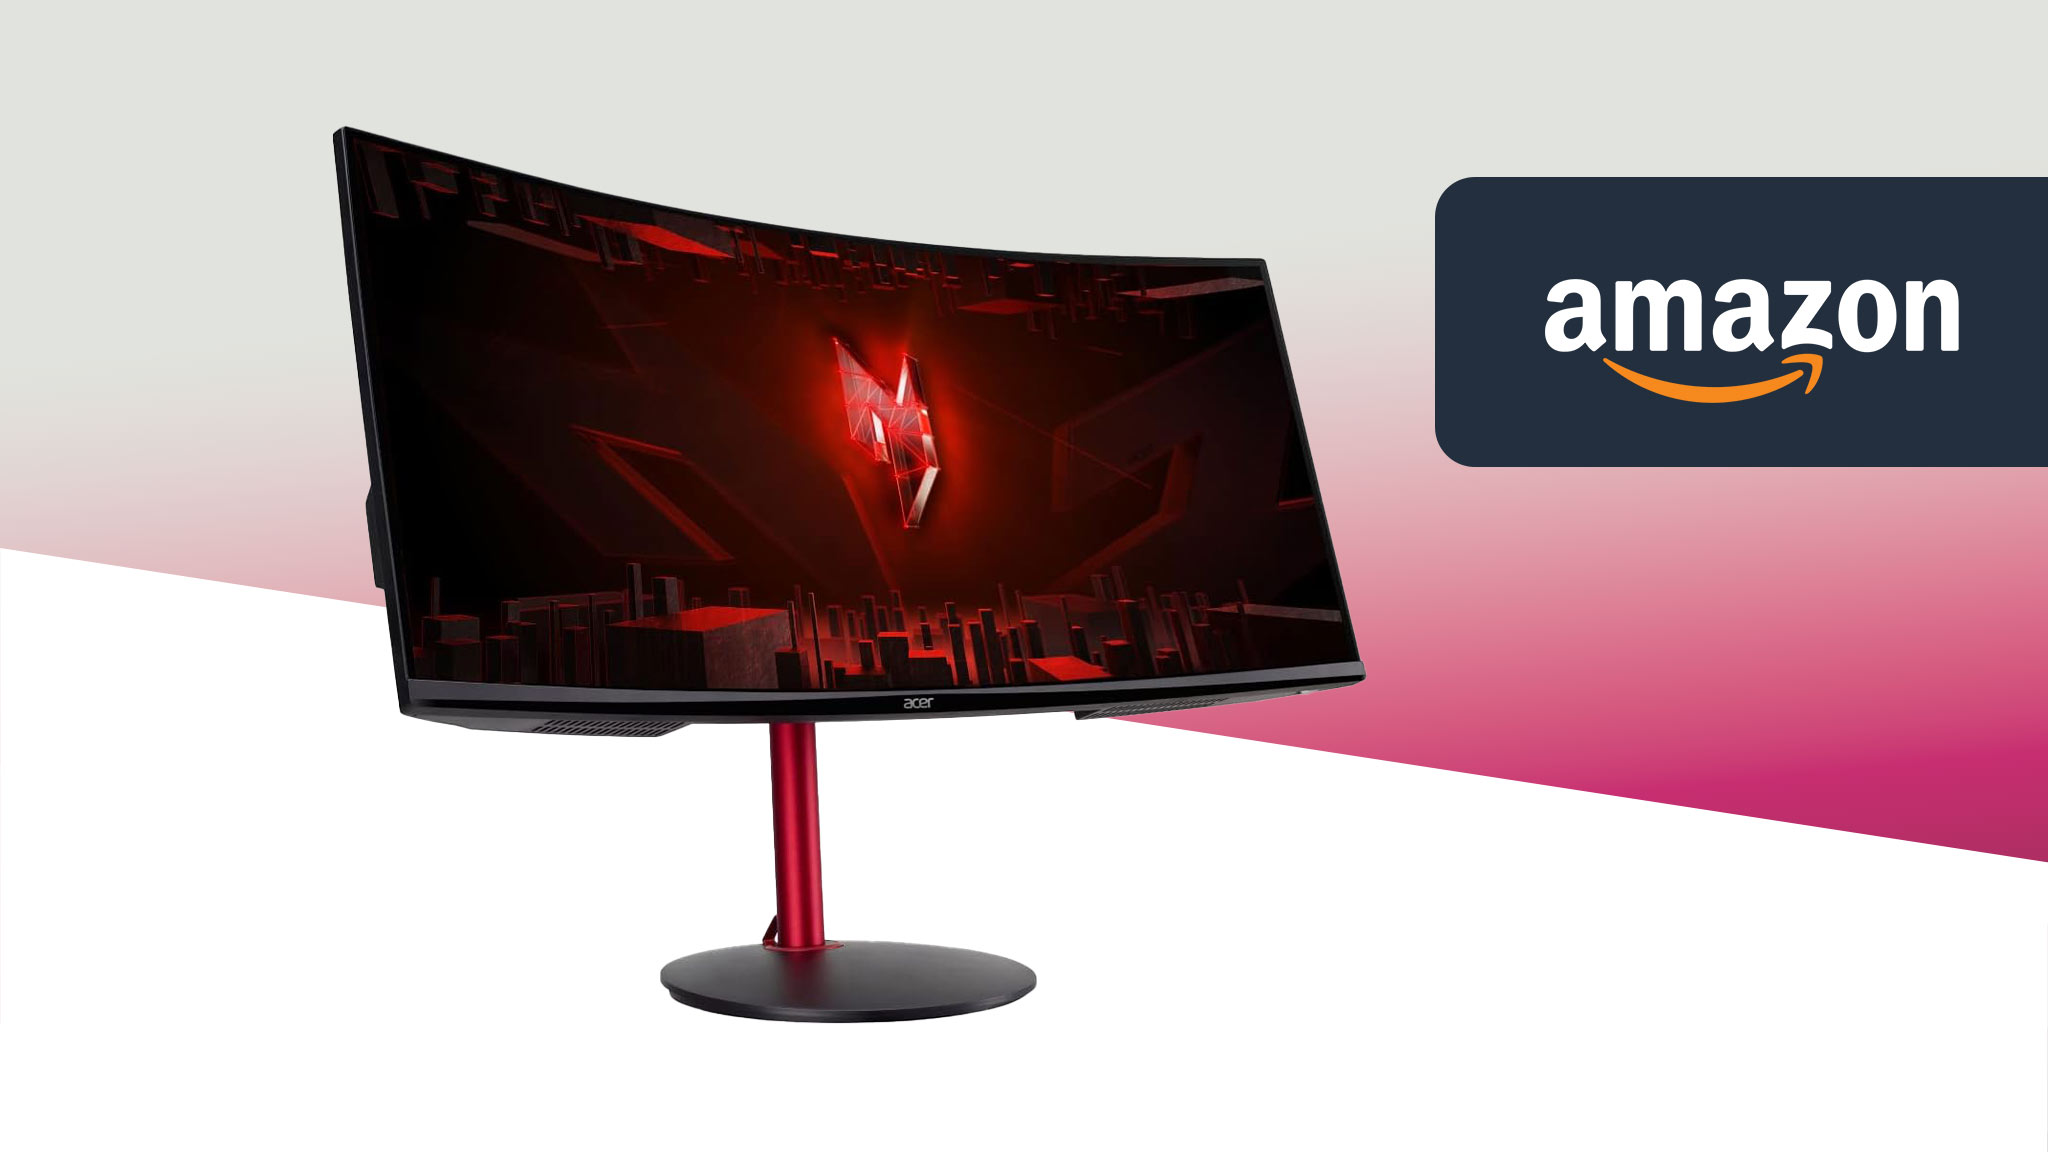 Get the 34-inch Acer gaming monitor for only €359